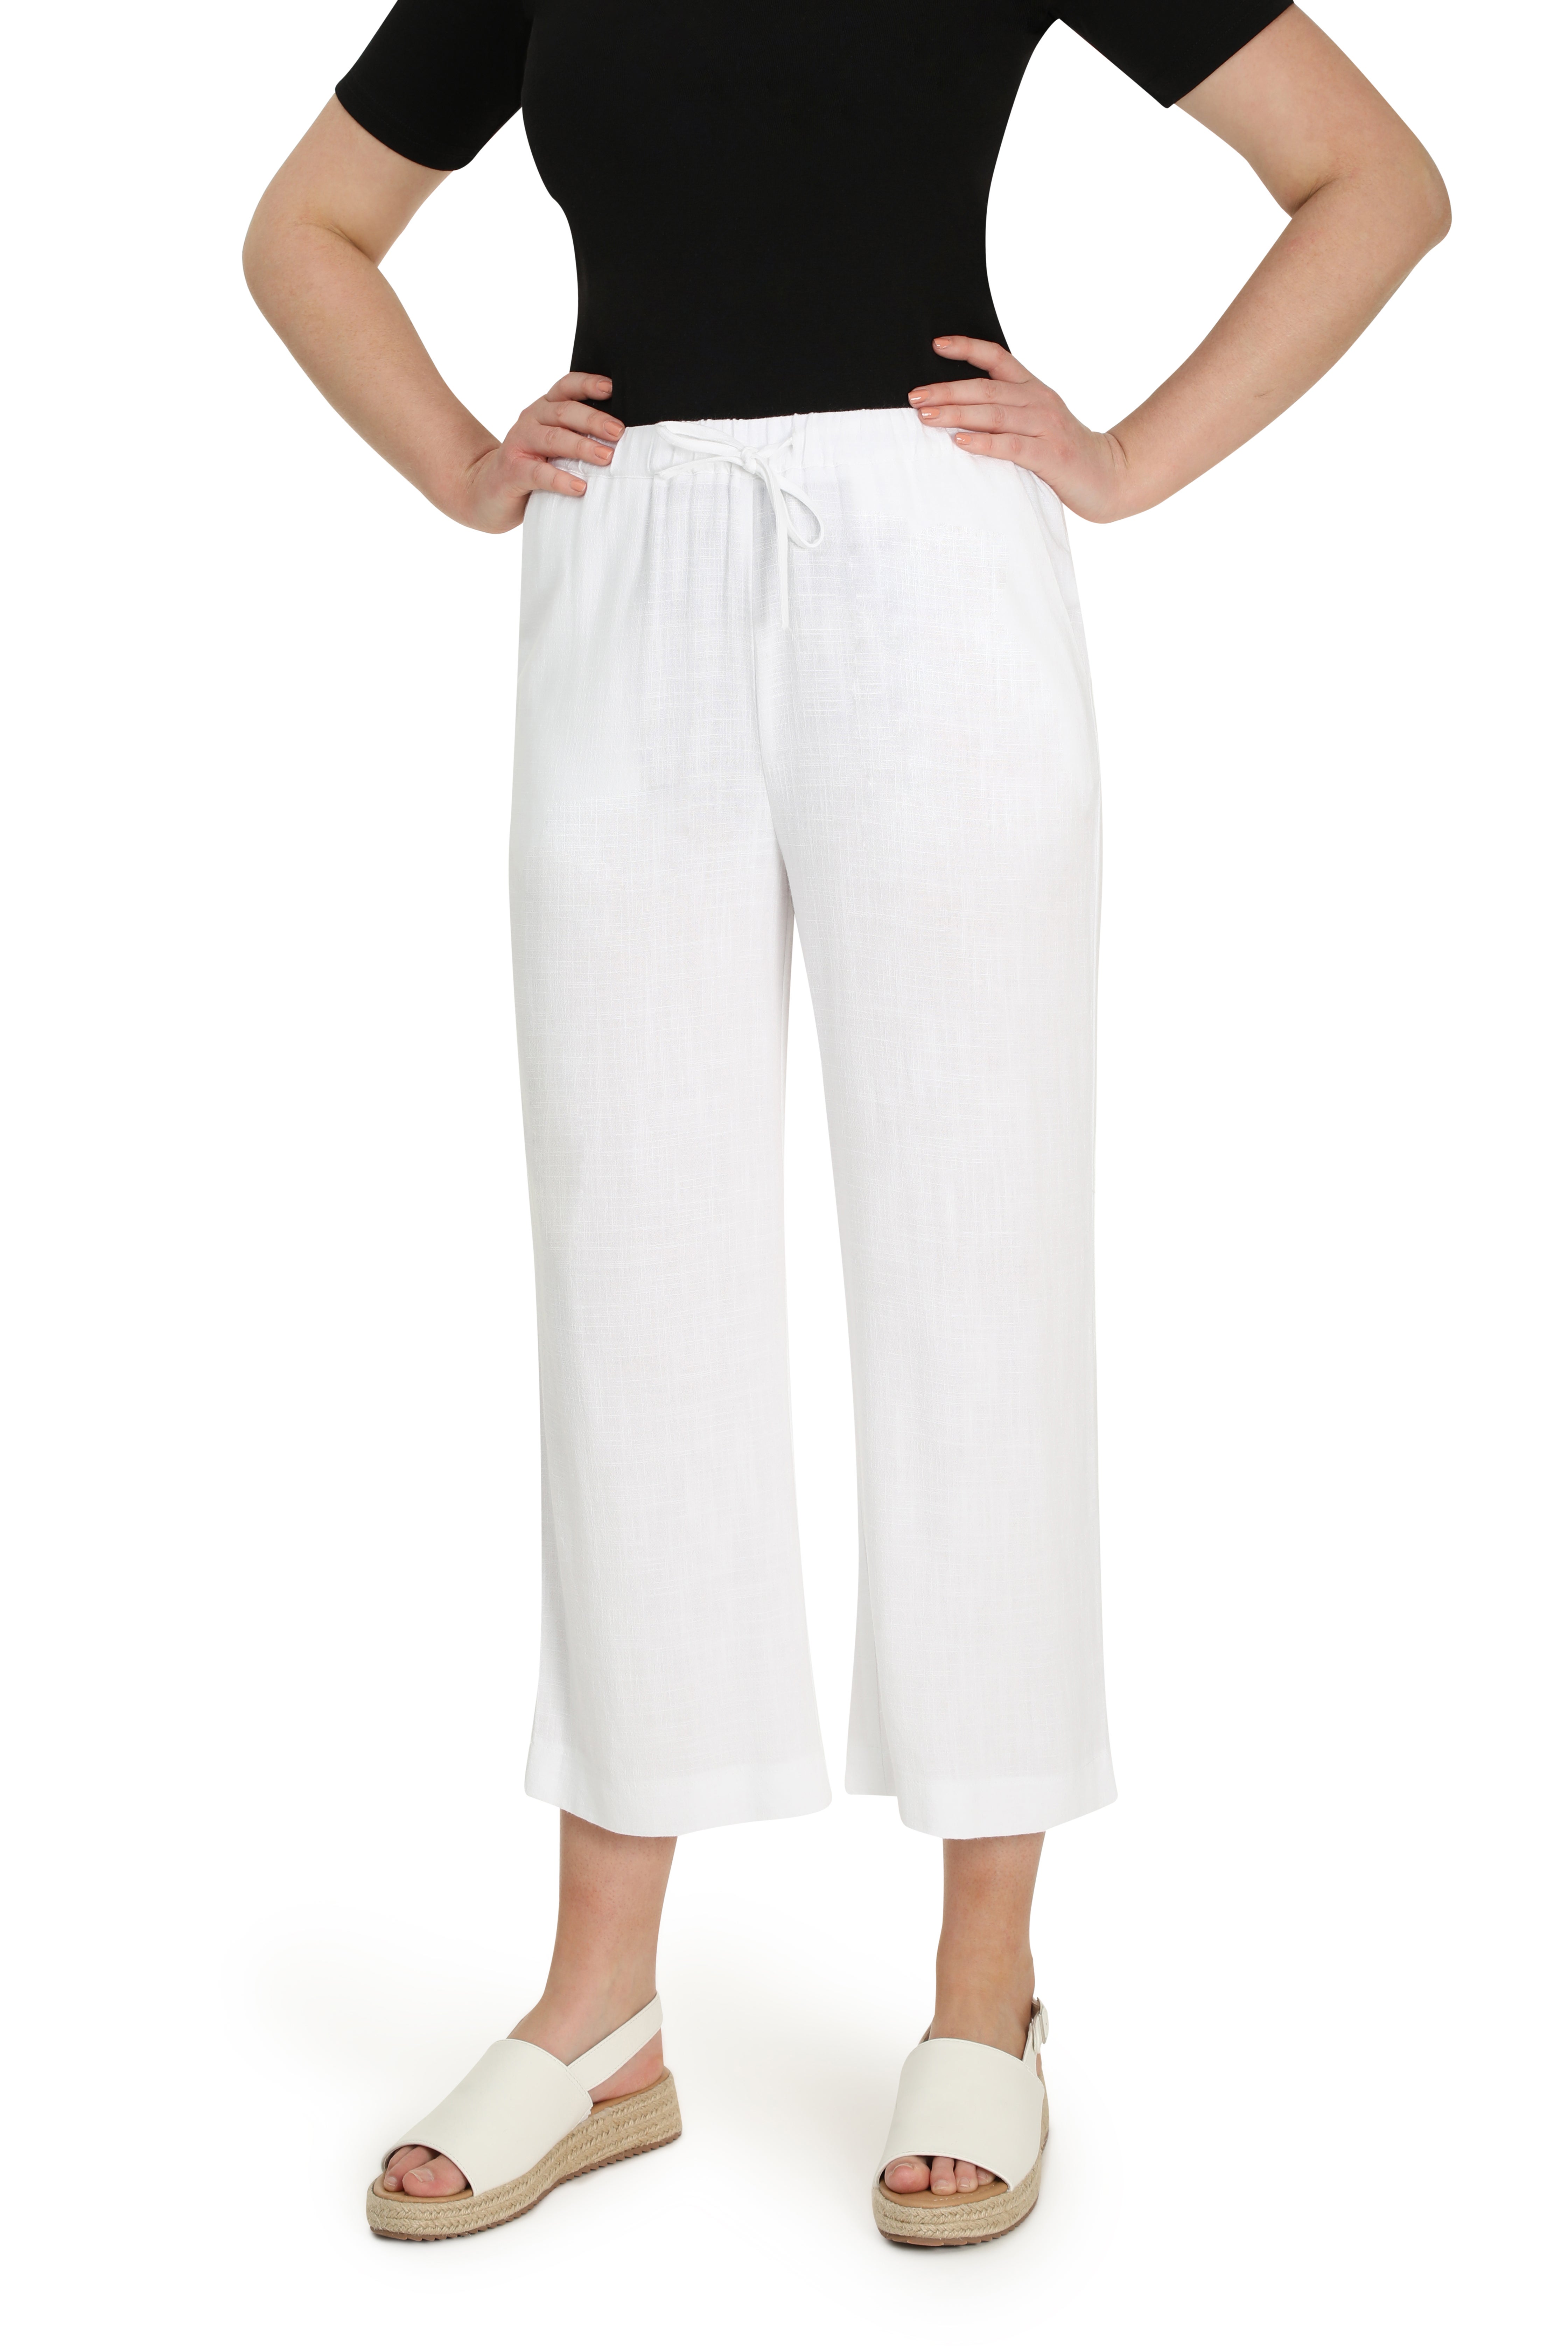 Viscose Linen Blend Crop Pant in White